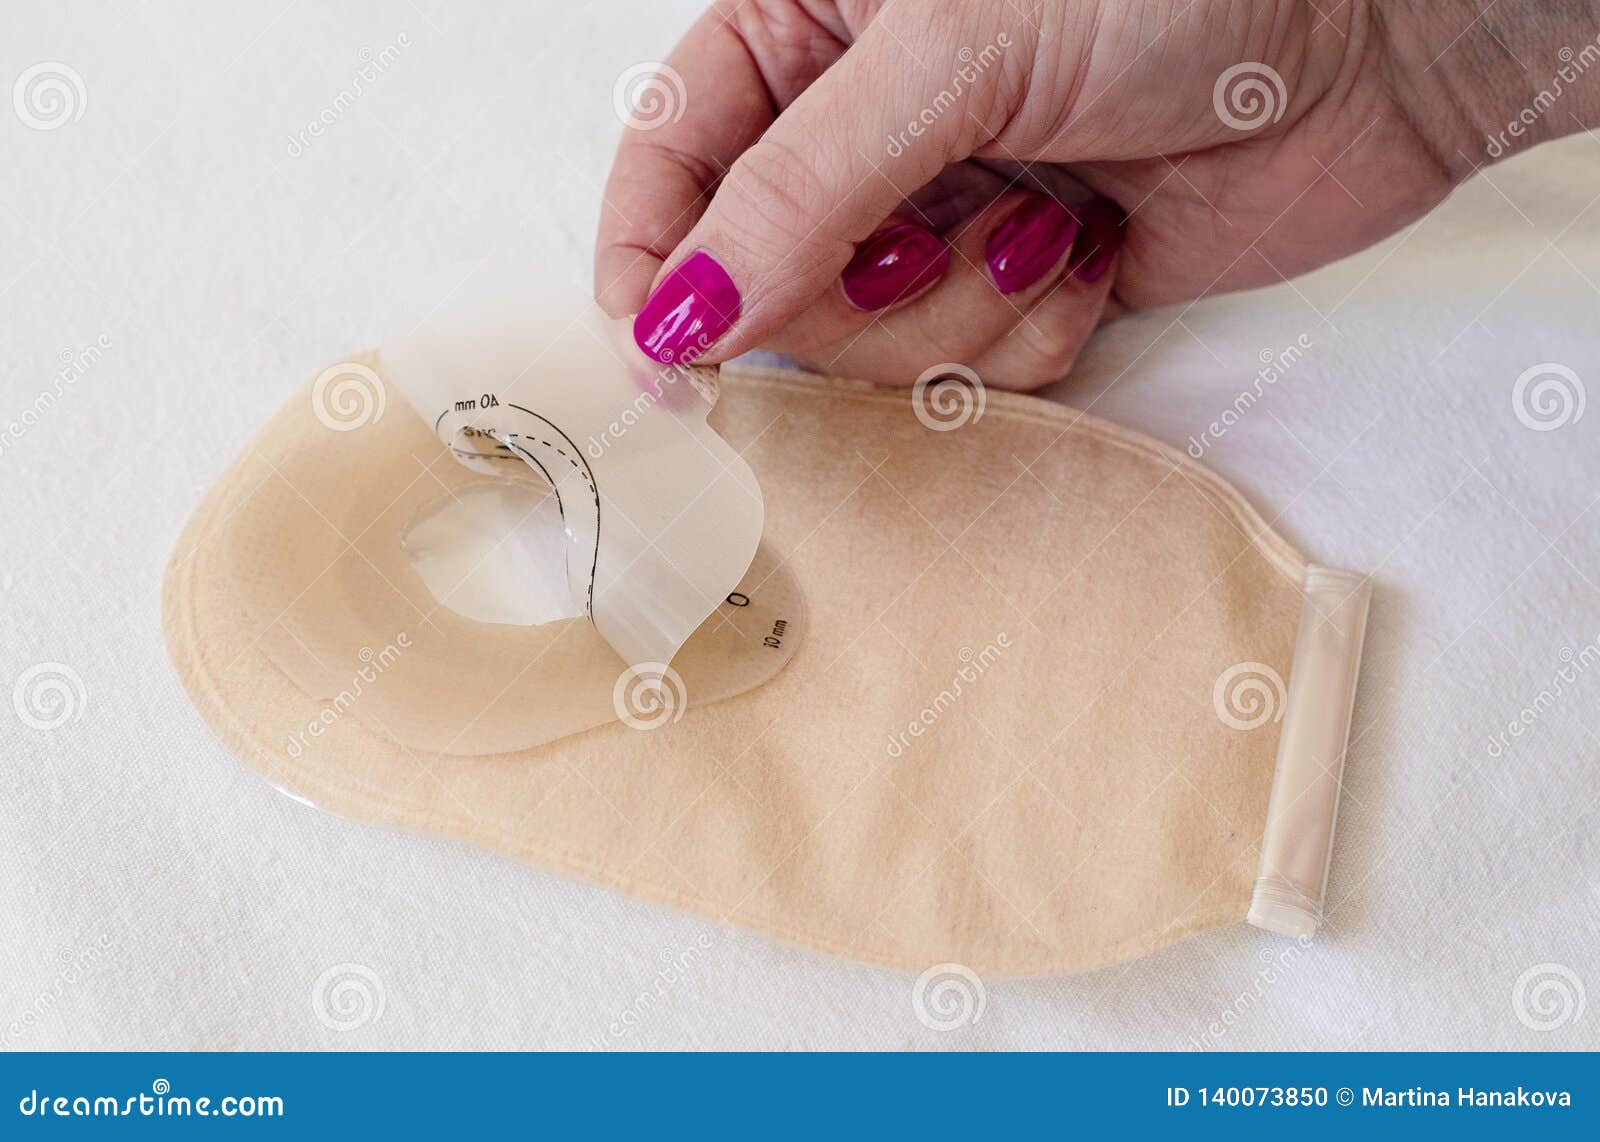 One-piece colostomy bag - Ostomy Care - Home Care Equipment - Fu Kang  Healthcare Supply Online Shop